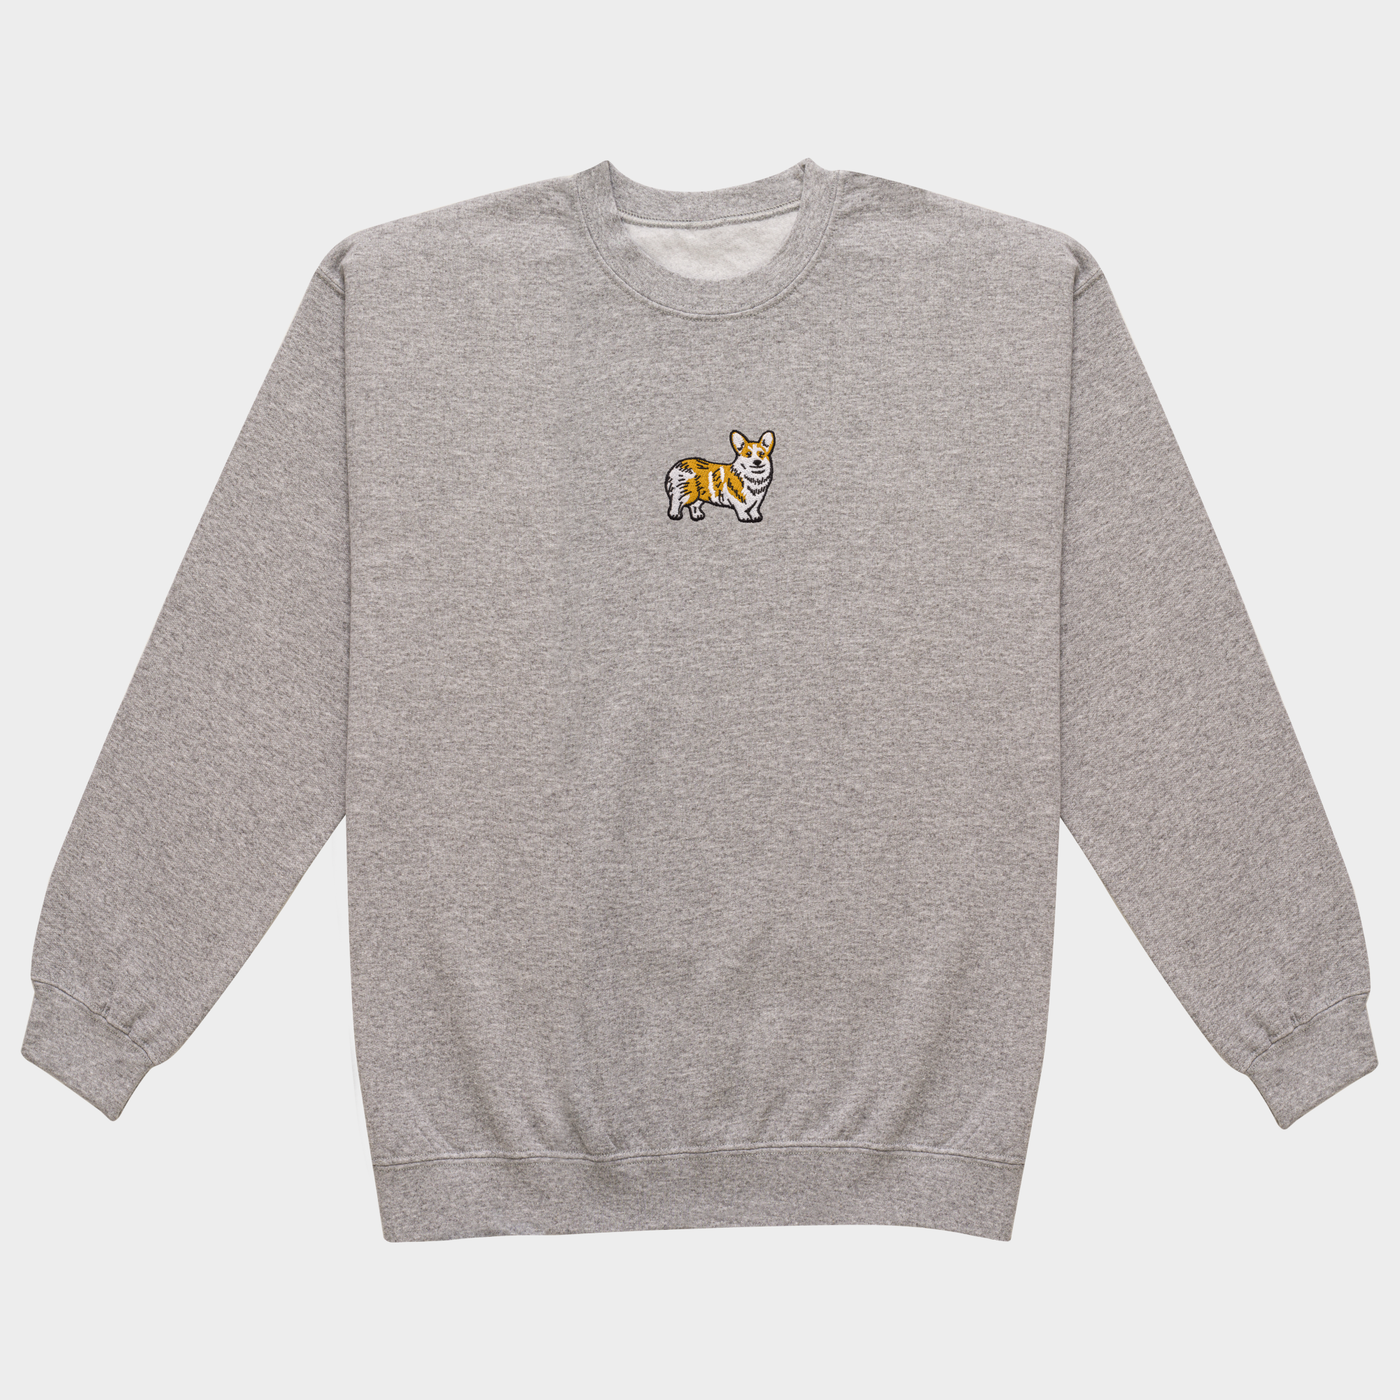 Bobby's Planet Men's Embroidered Corgi Sweatshirt from Paws Dog Cat Animals Collection in Sport Grey Color#color_sport-grey